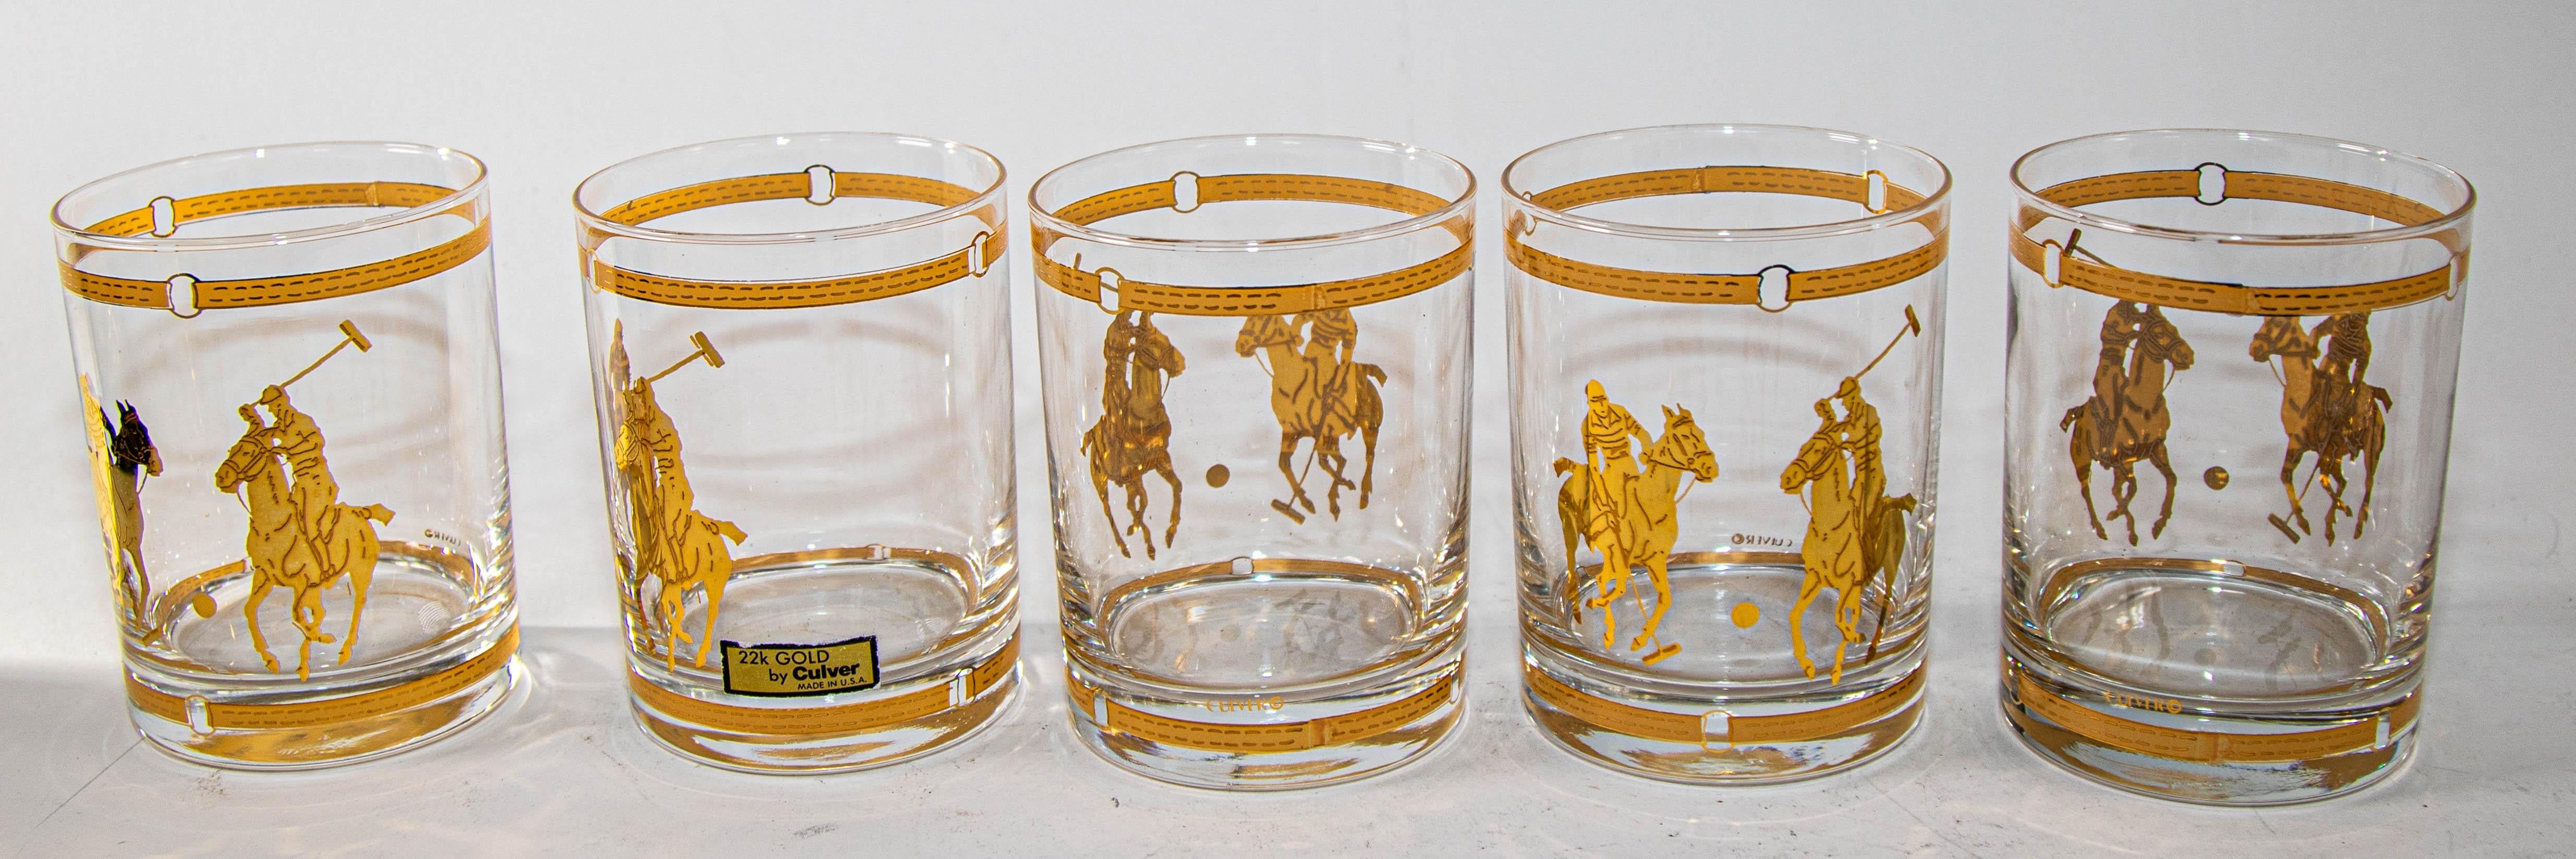 polo drinking glasses